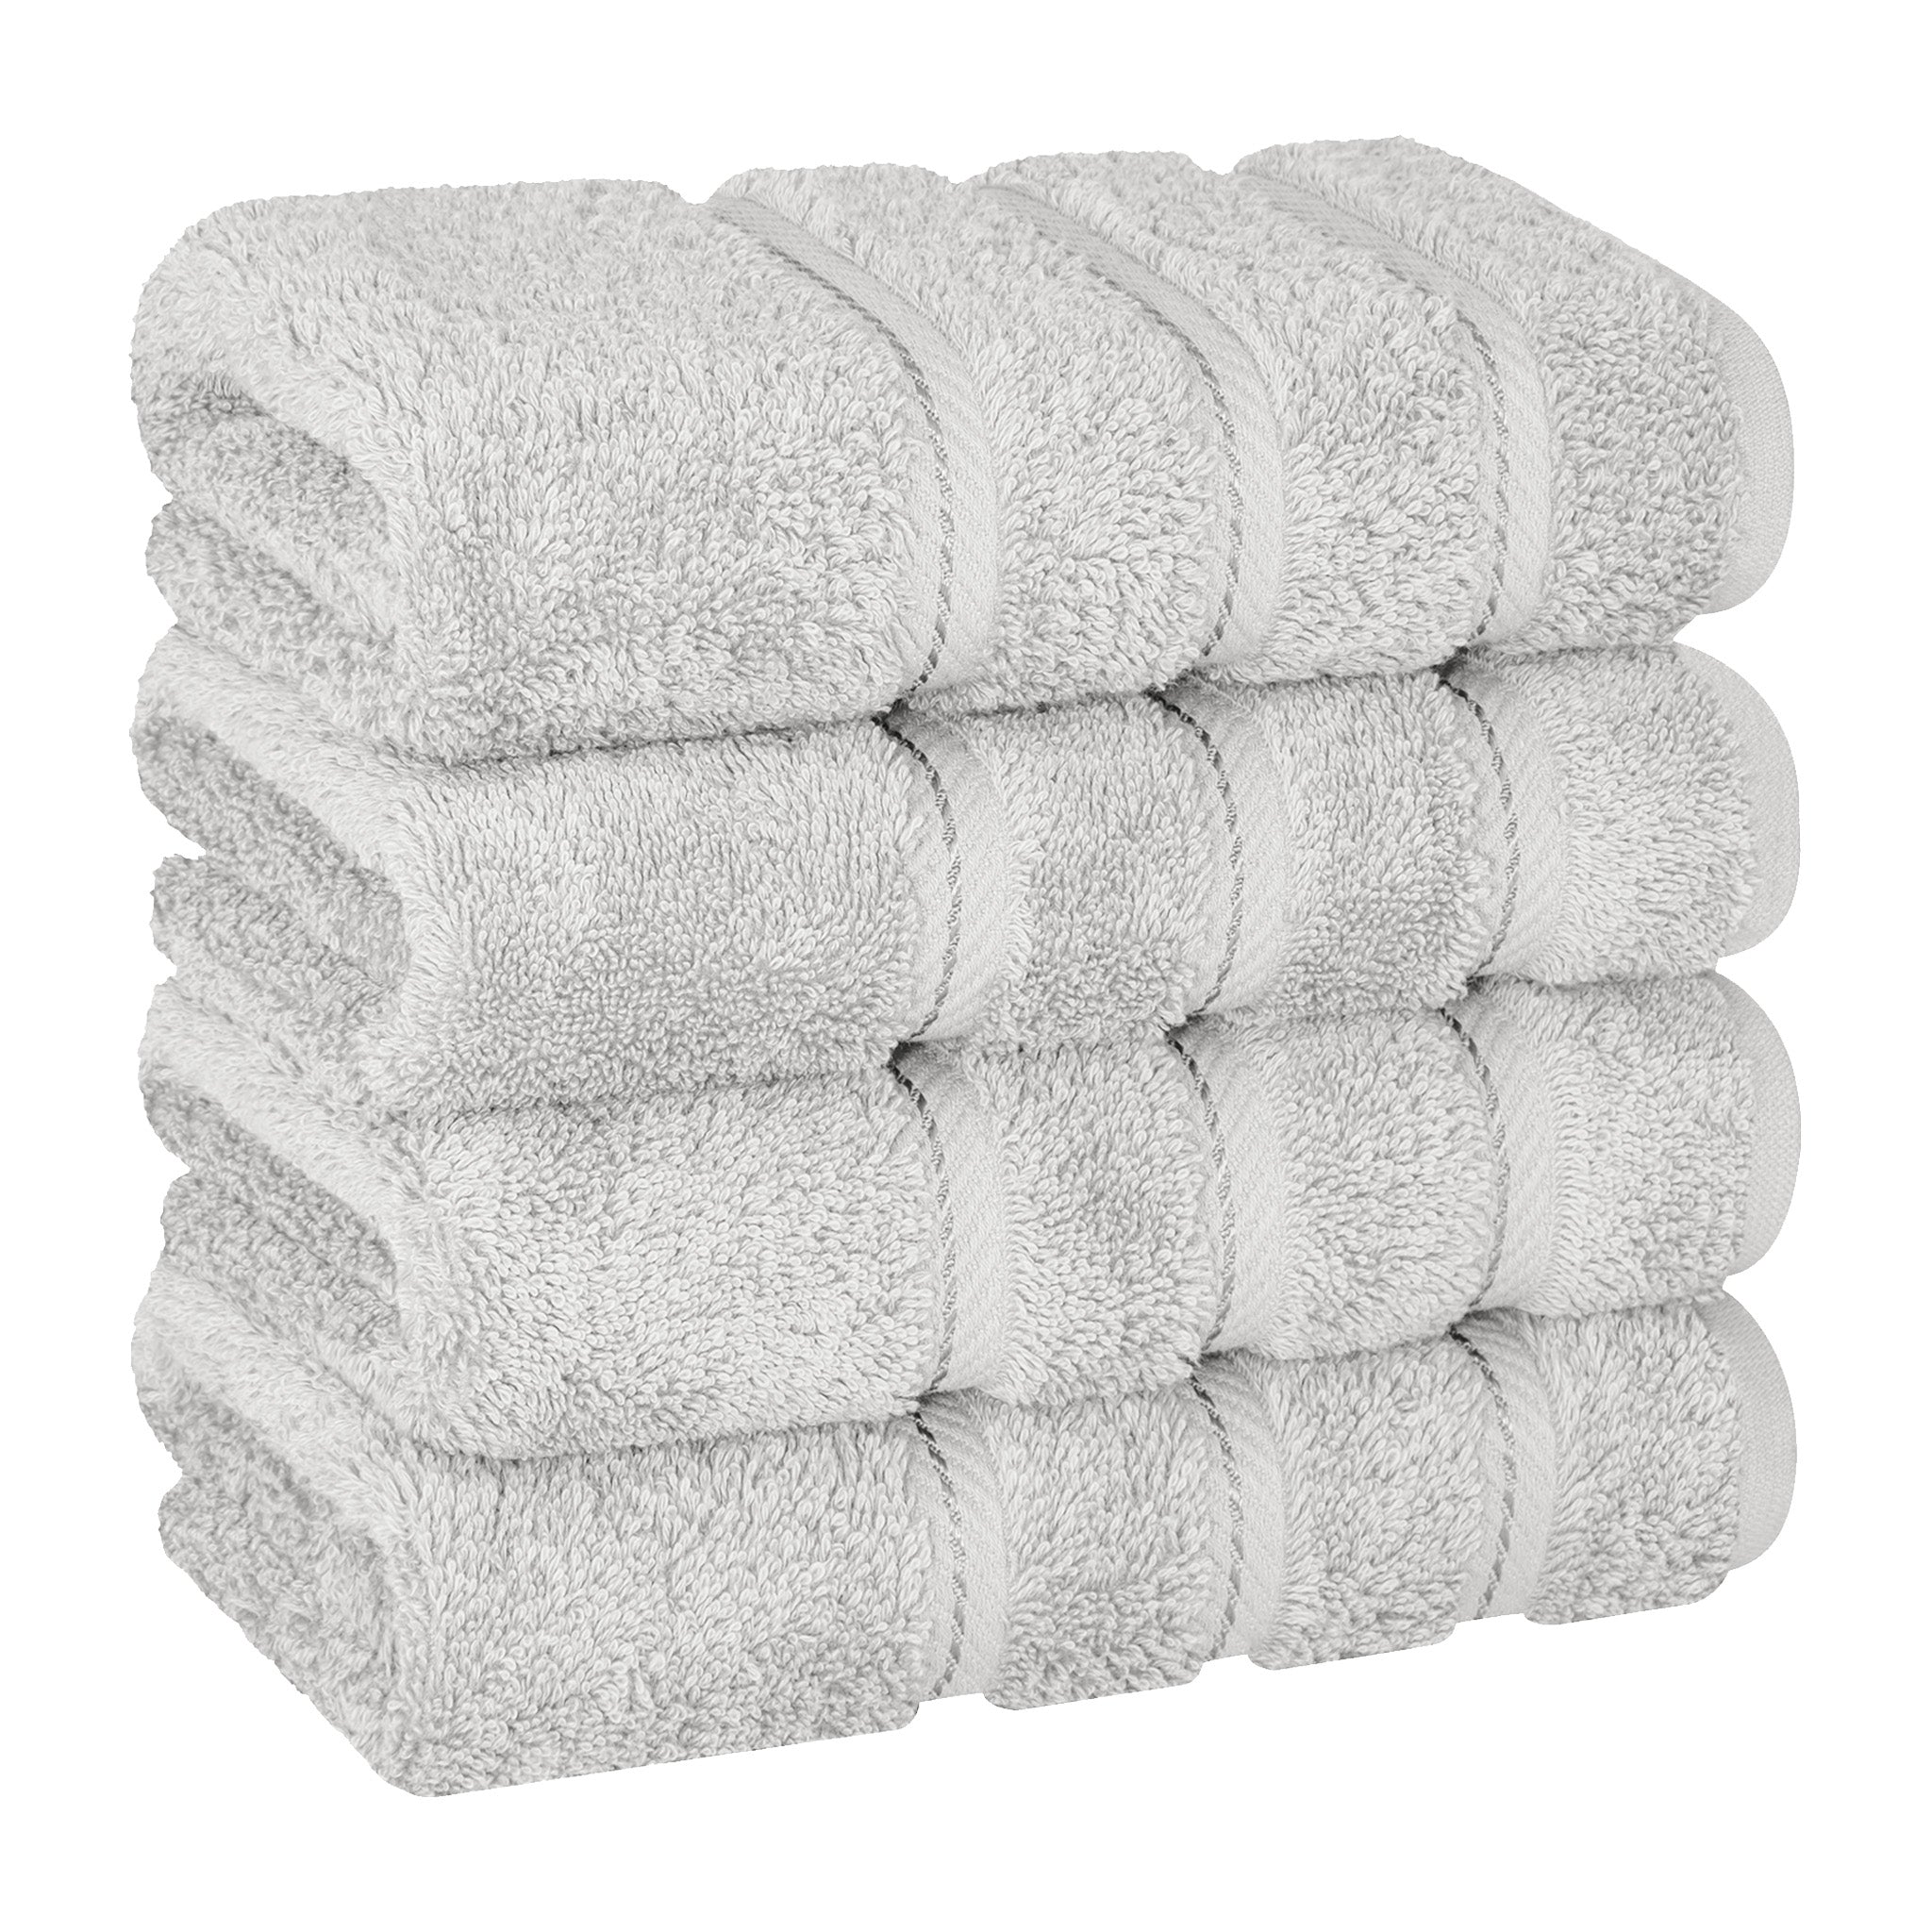 American Soft Linen 100% Turkish Cotton 4 Pack Hand Towel Set silver-gray-1